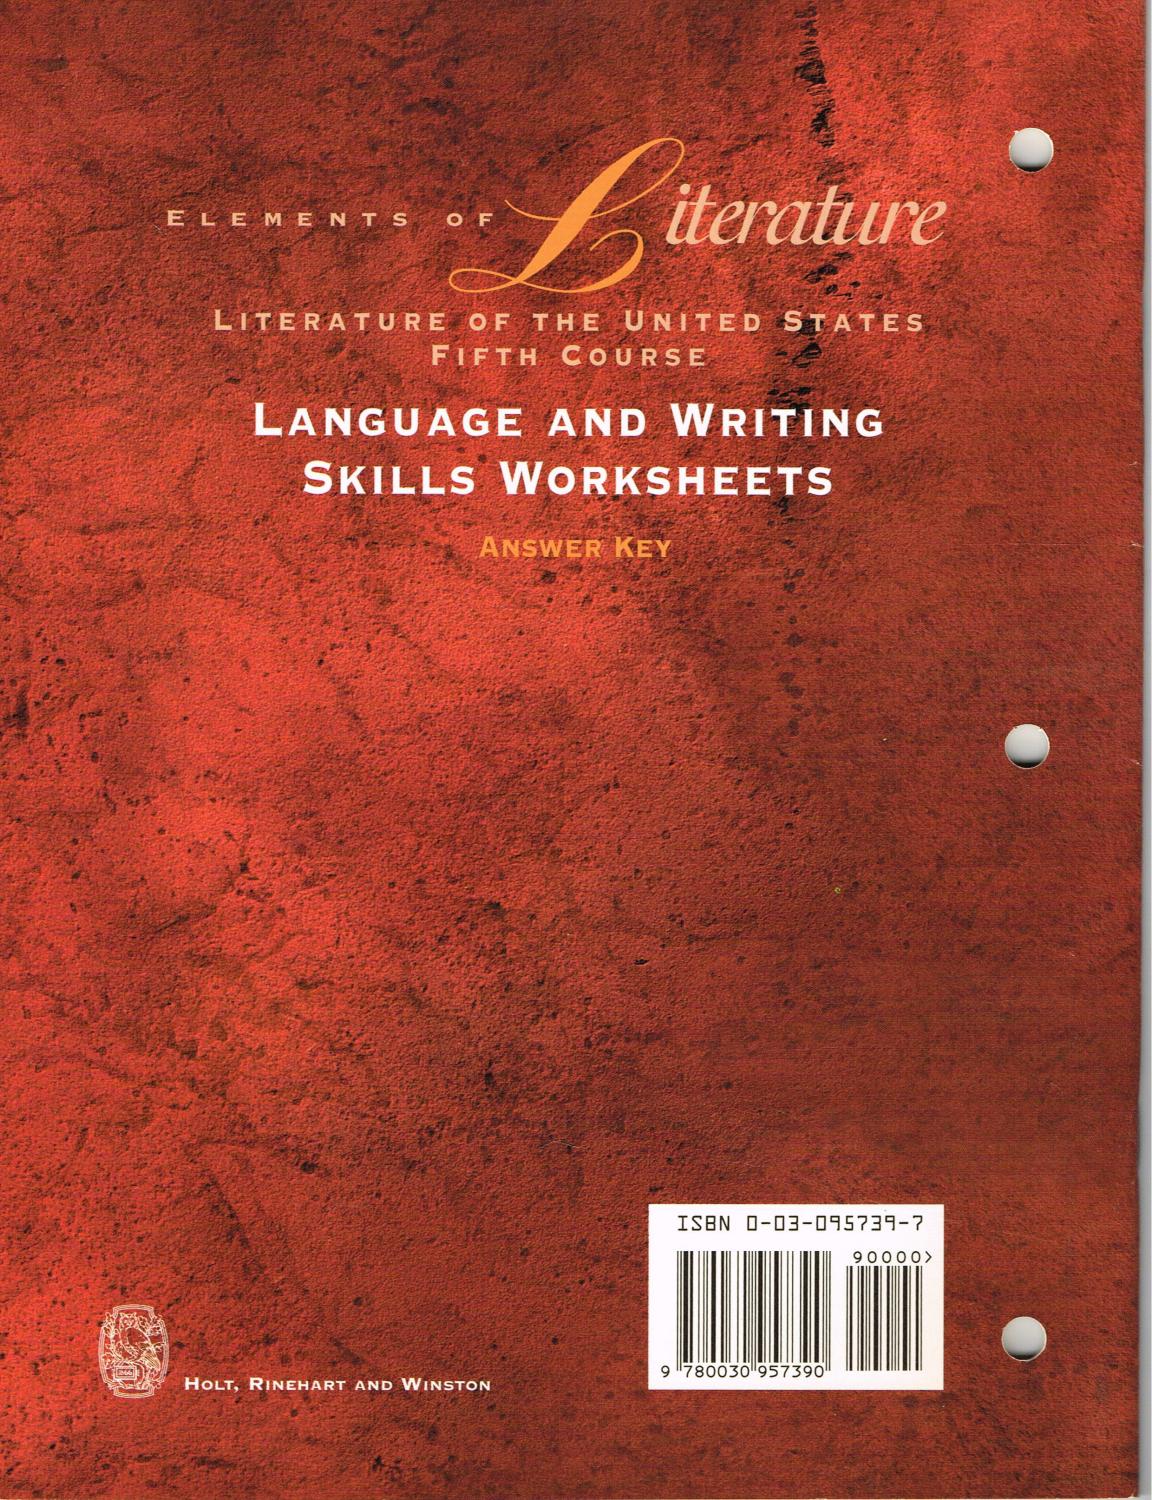 elements-of-literature-fifth-course-literature-of-the-united-states-language-and-writing